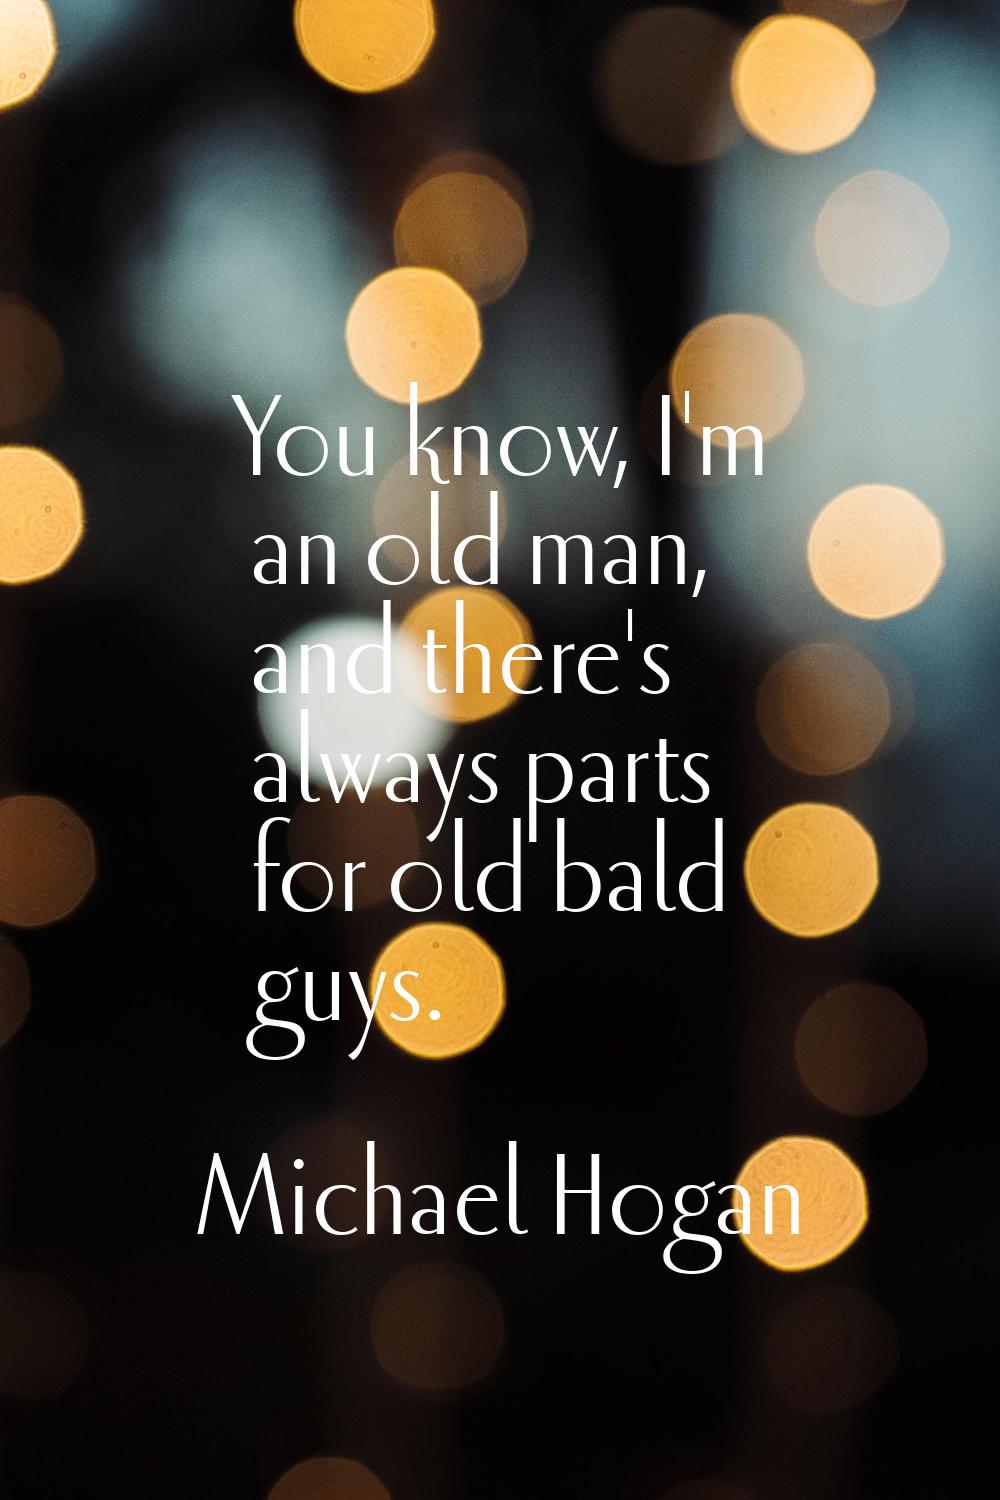 You know, I'm an old man, and there's always parts for old bald guys.